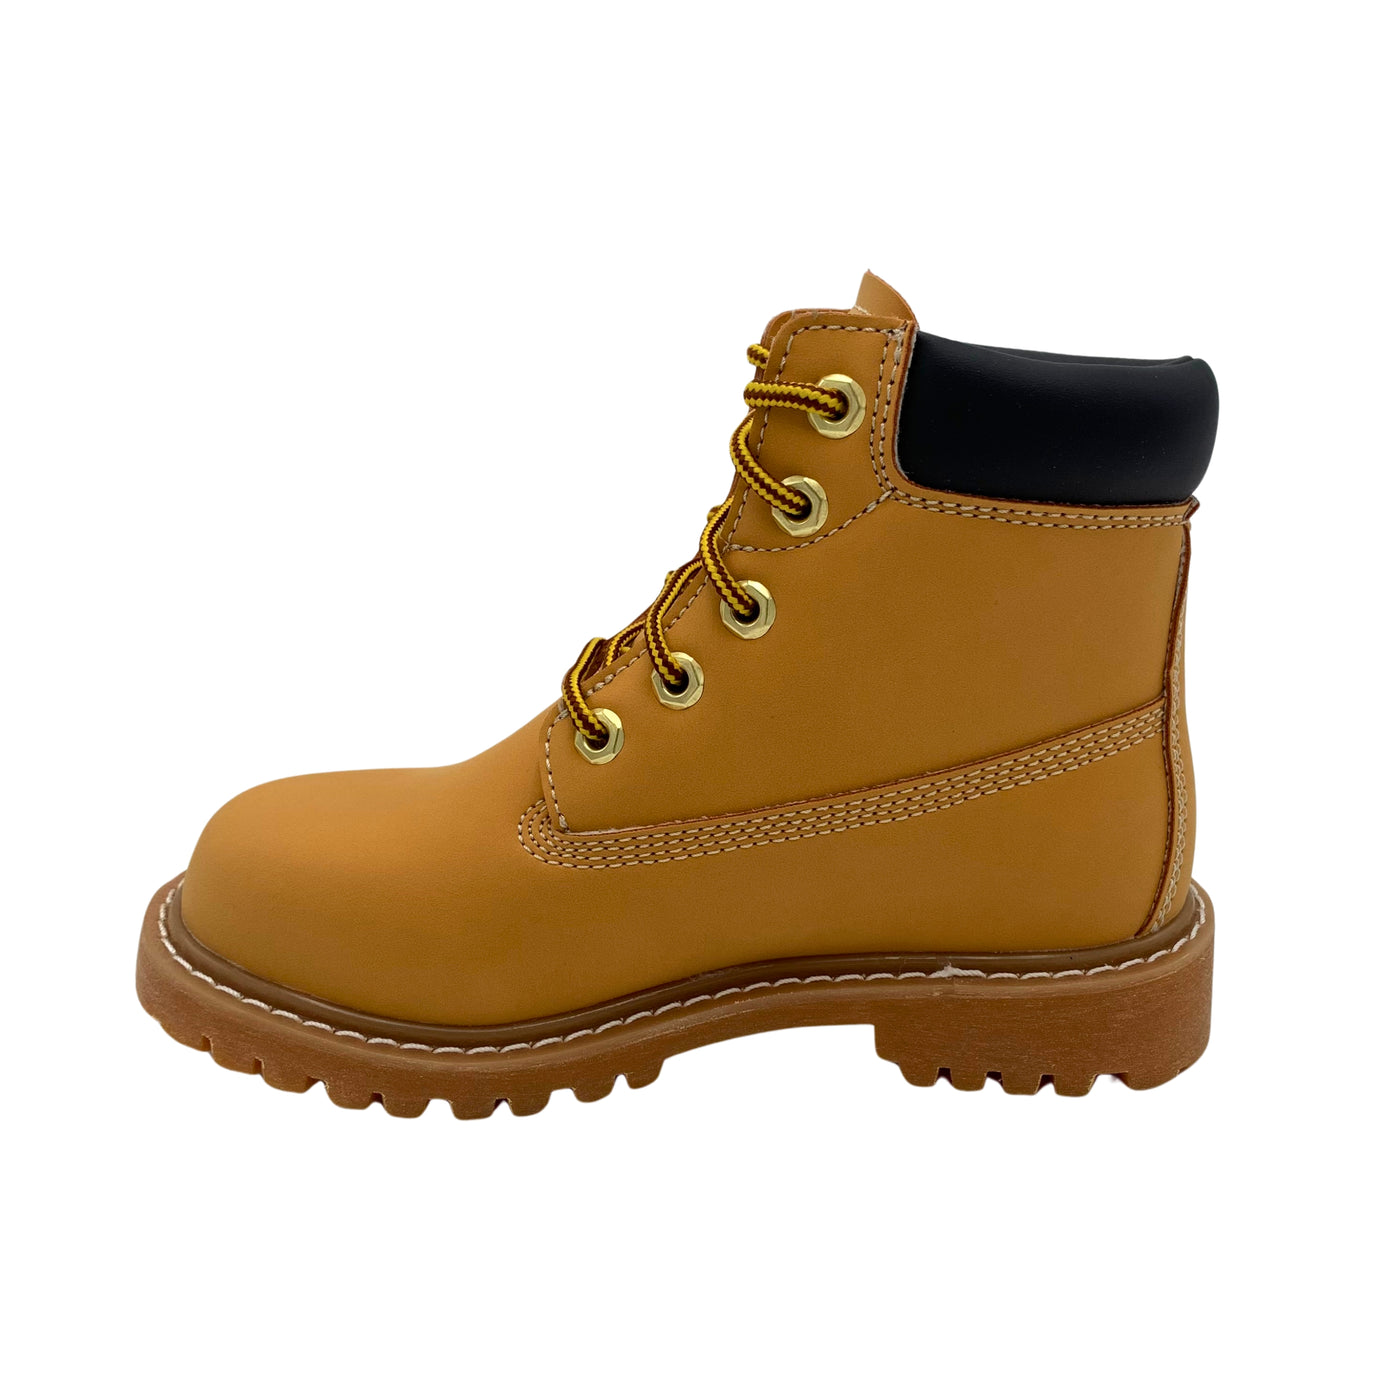 Forester: Kid's Work Boot - Tan 4803